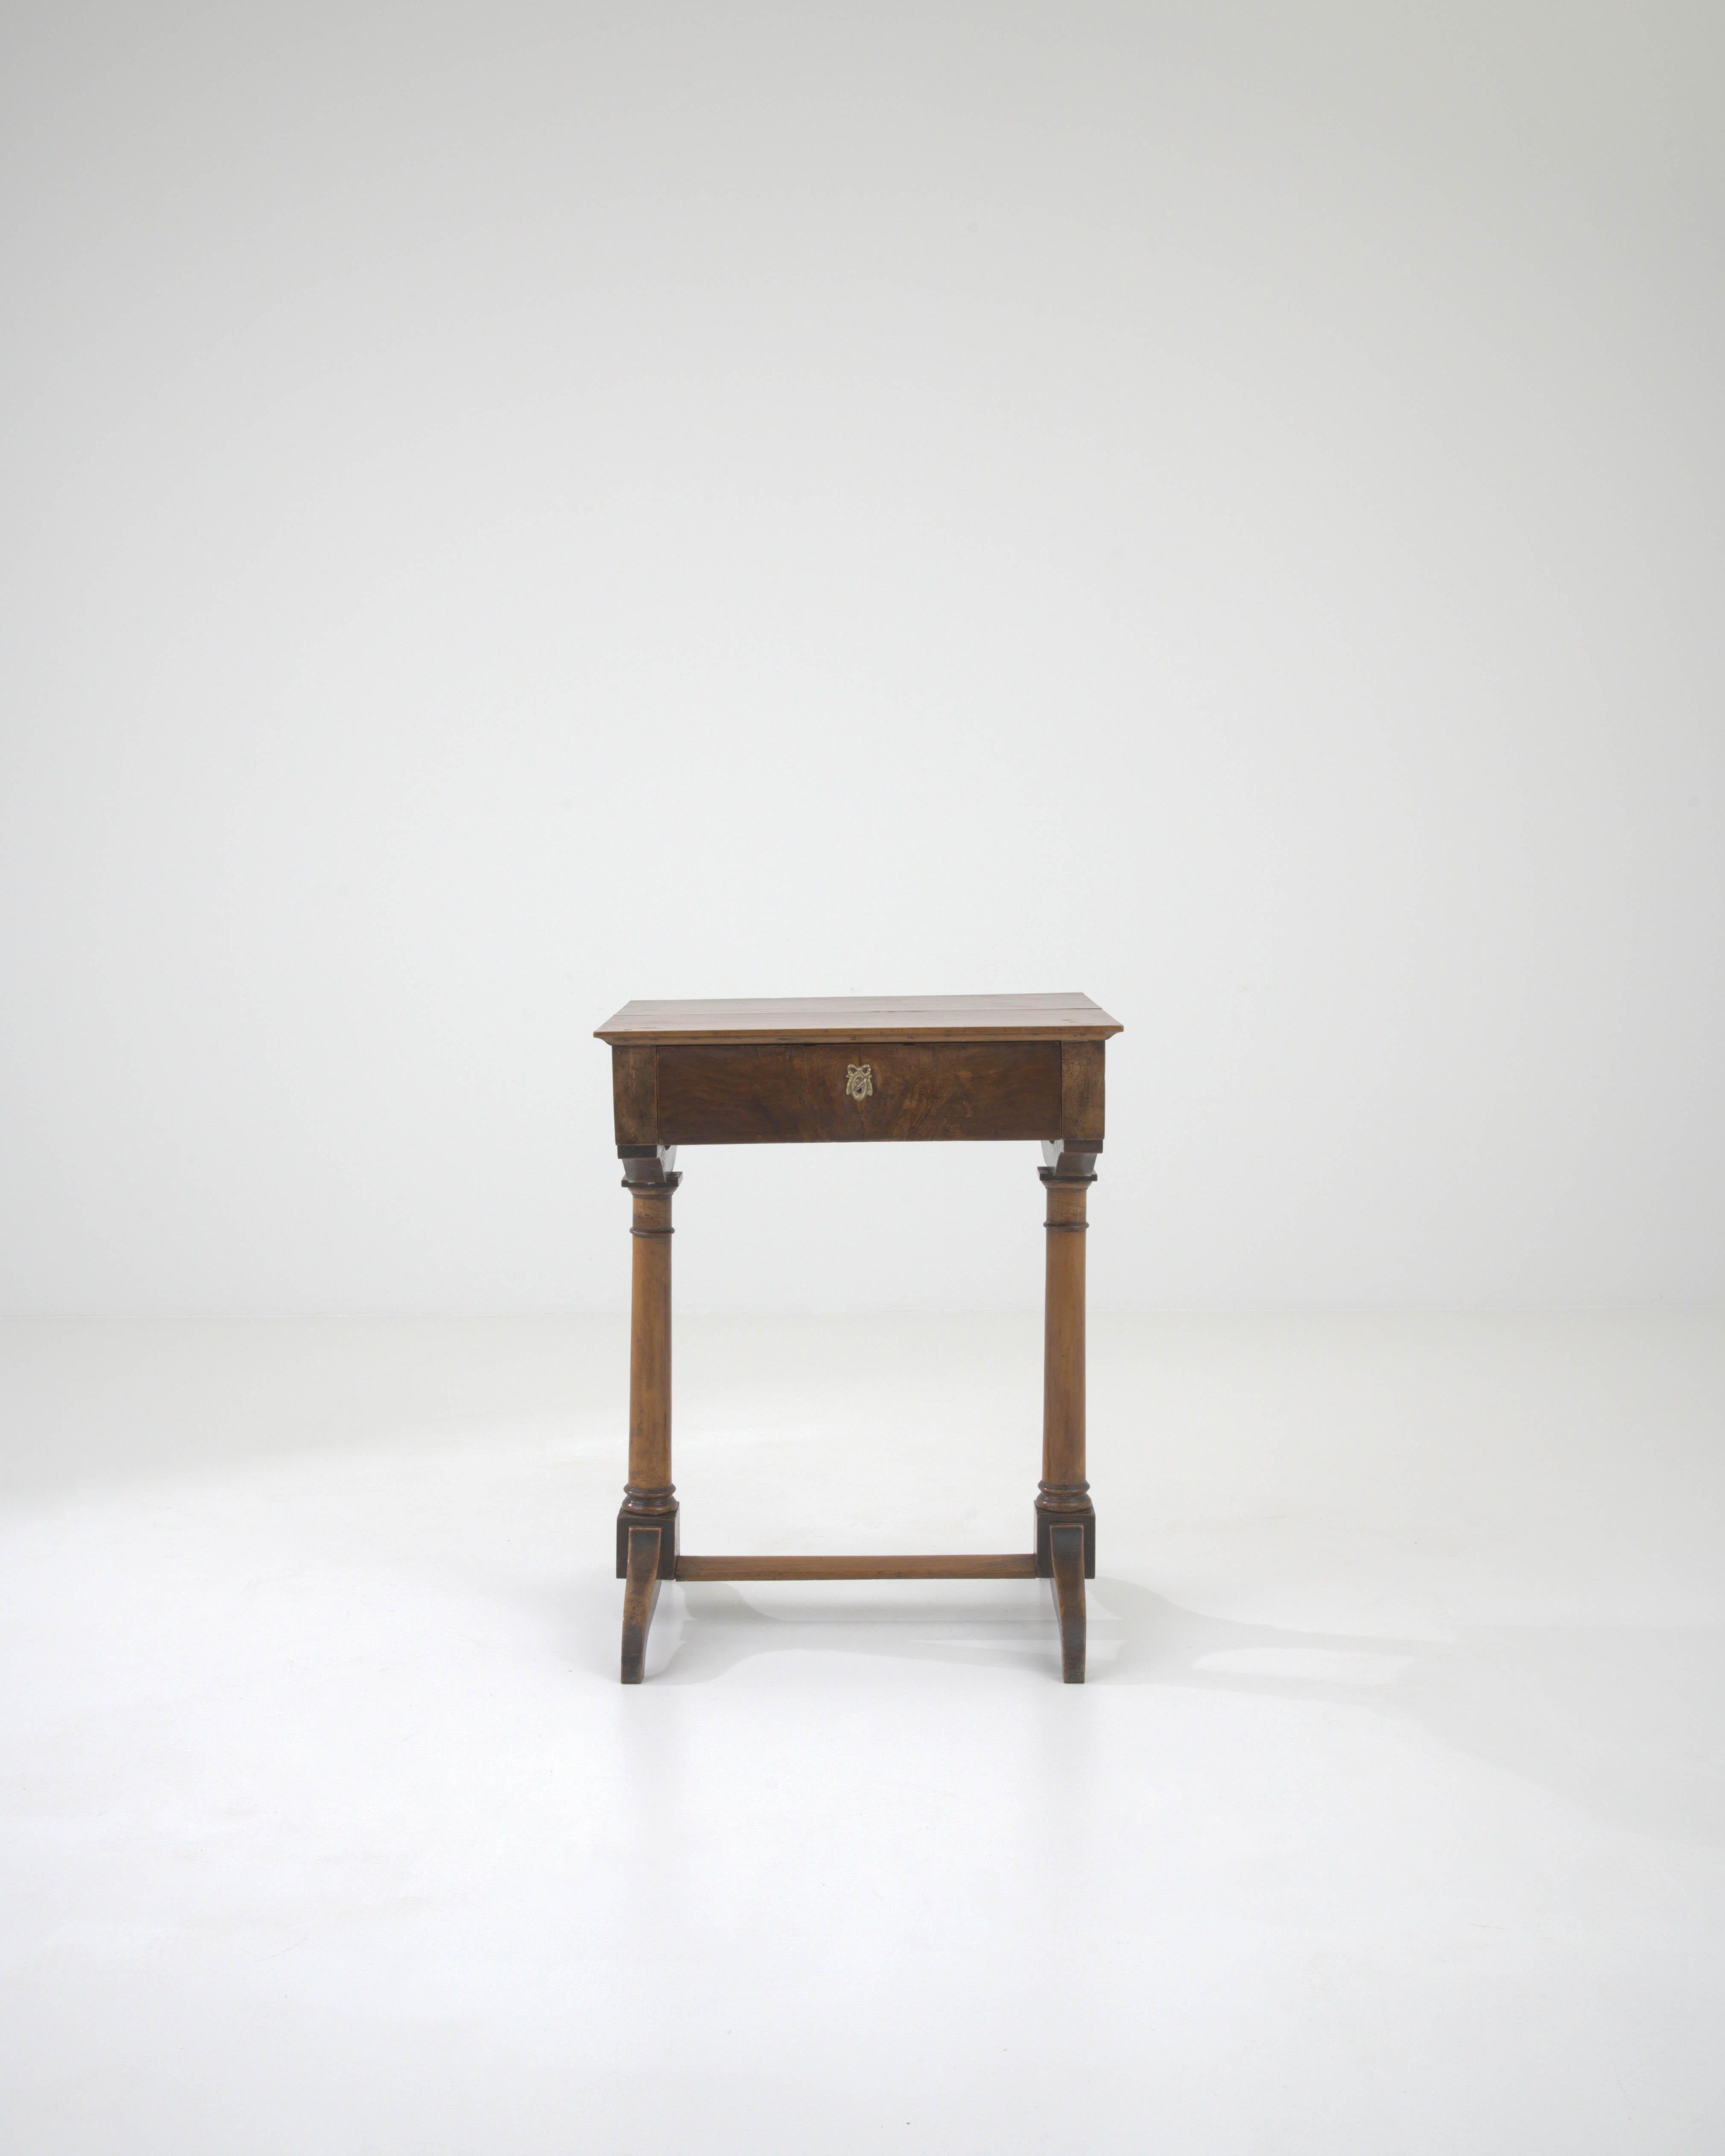 This authentic 19th Century French Wooden Side Table exudes the charm and character that only age can bestow. With its original patina, it tells a story of a bygone era, bringing with it an air of historical elegance to any room. The table stands on